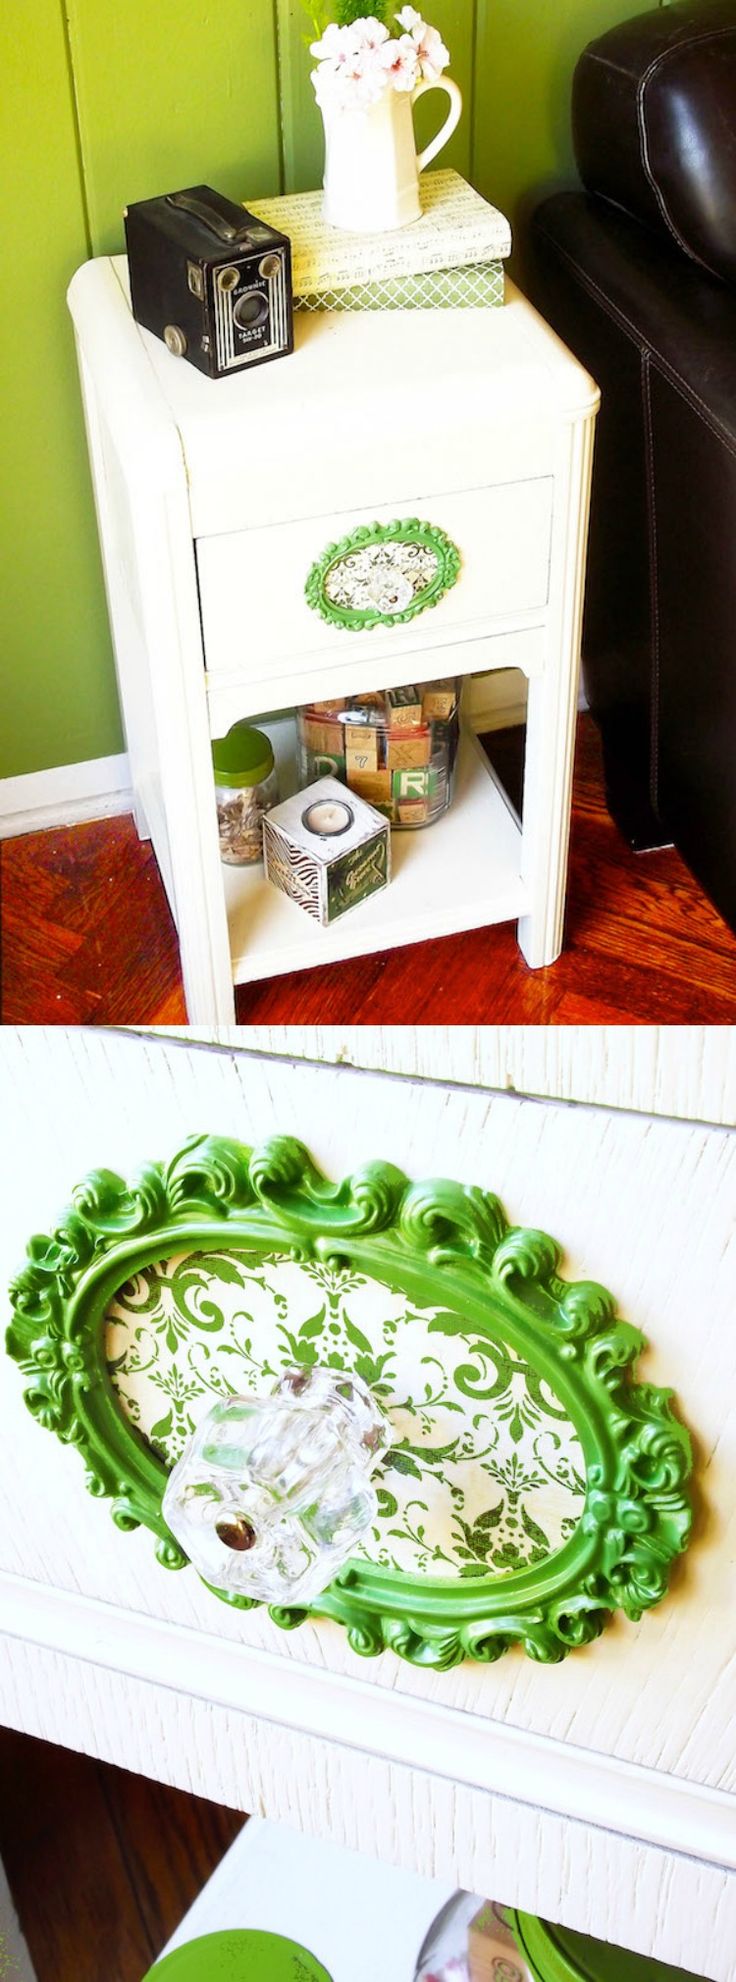 David's DIY side table makeover was missing something - so he used an inexpe...